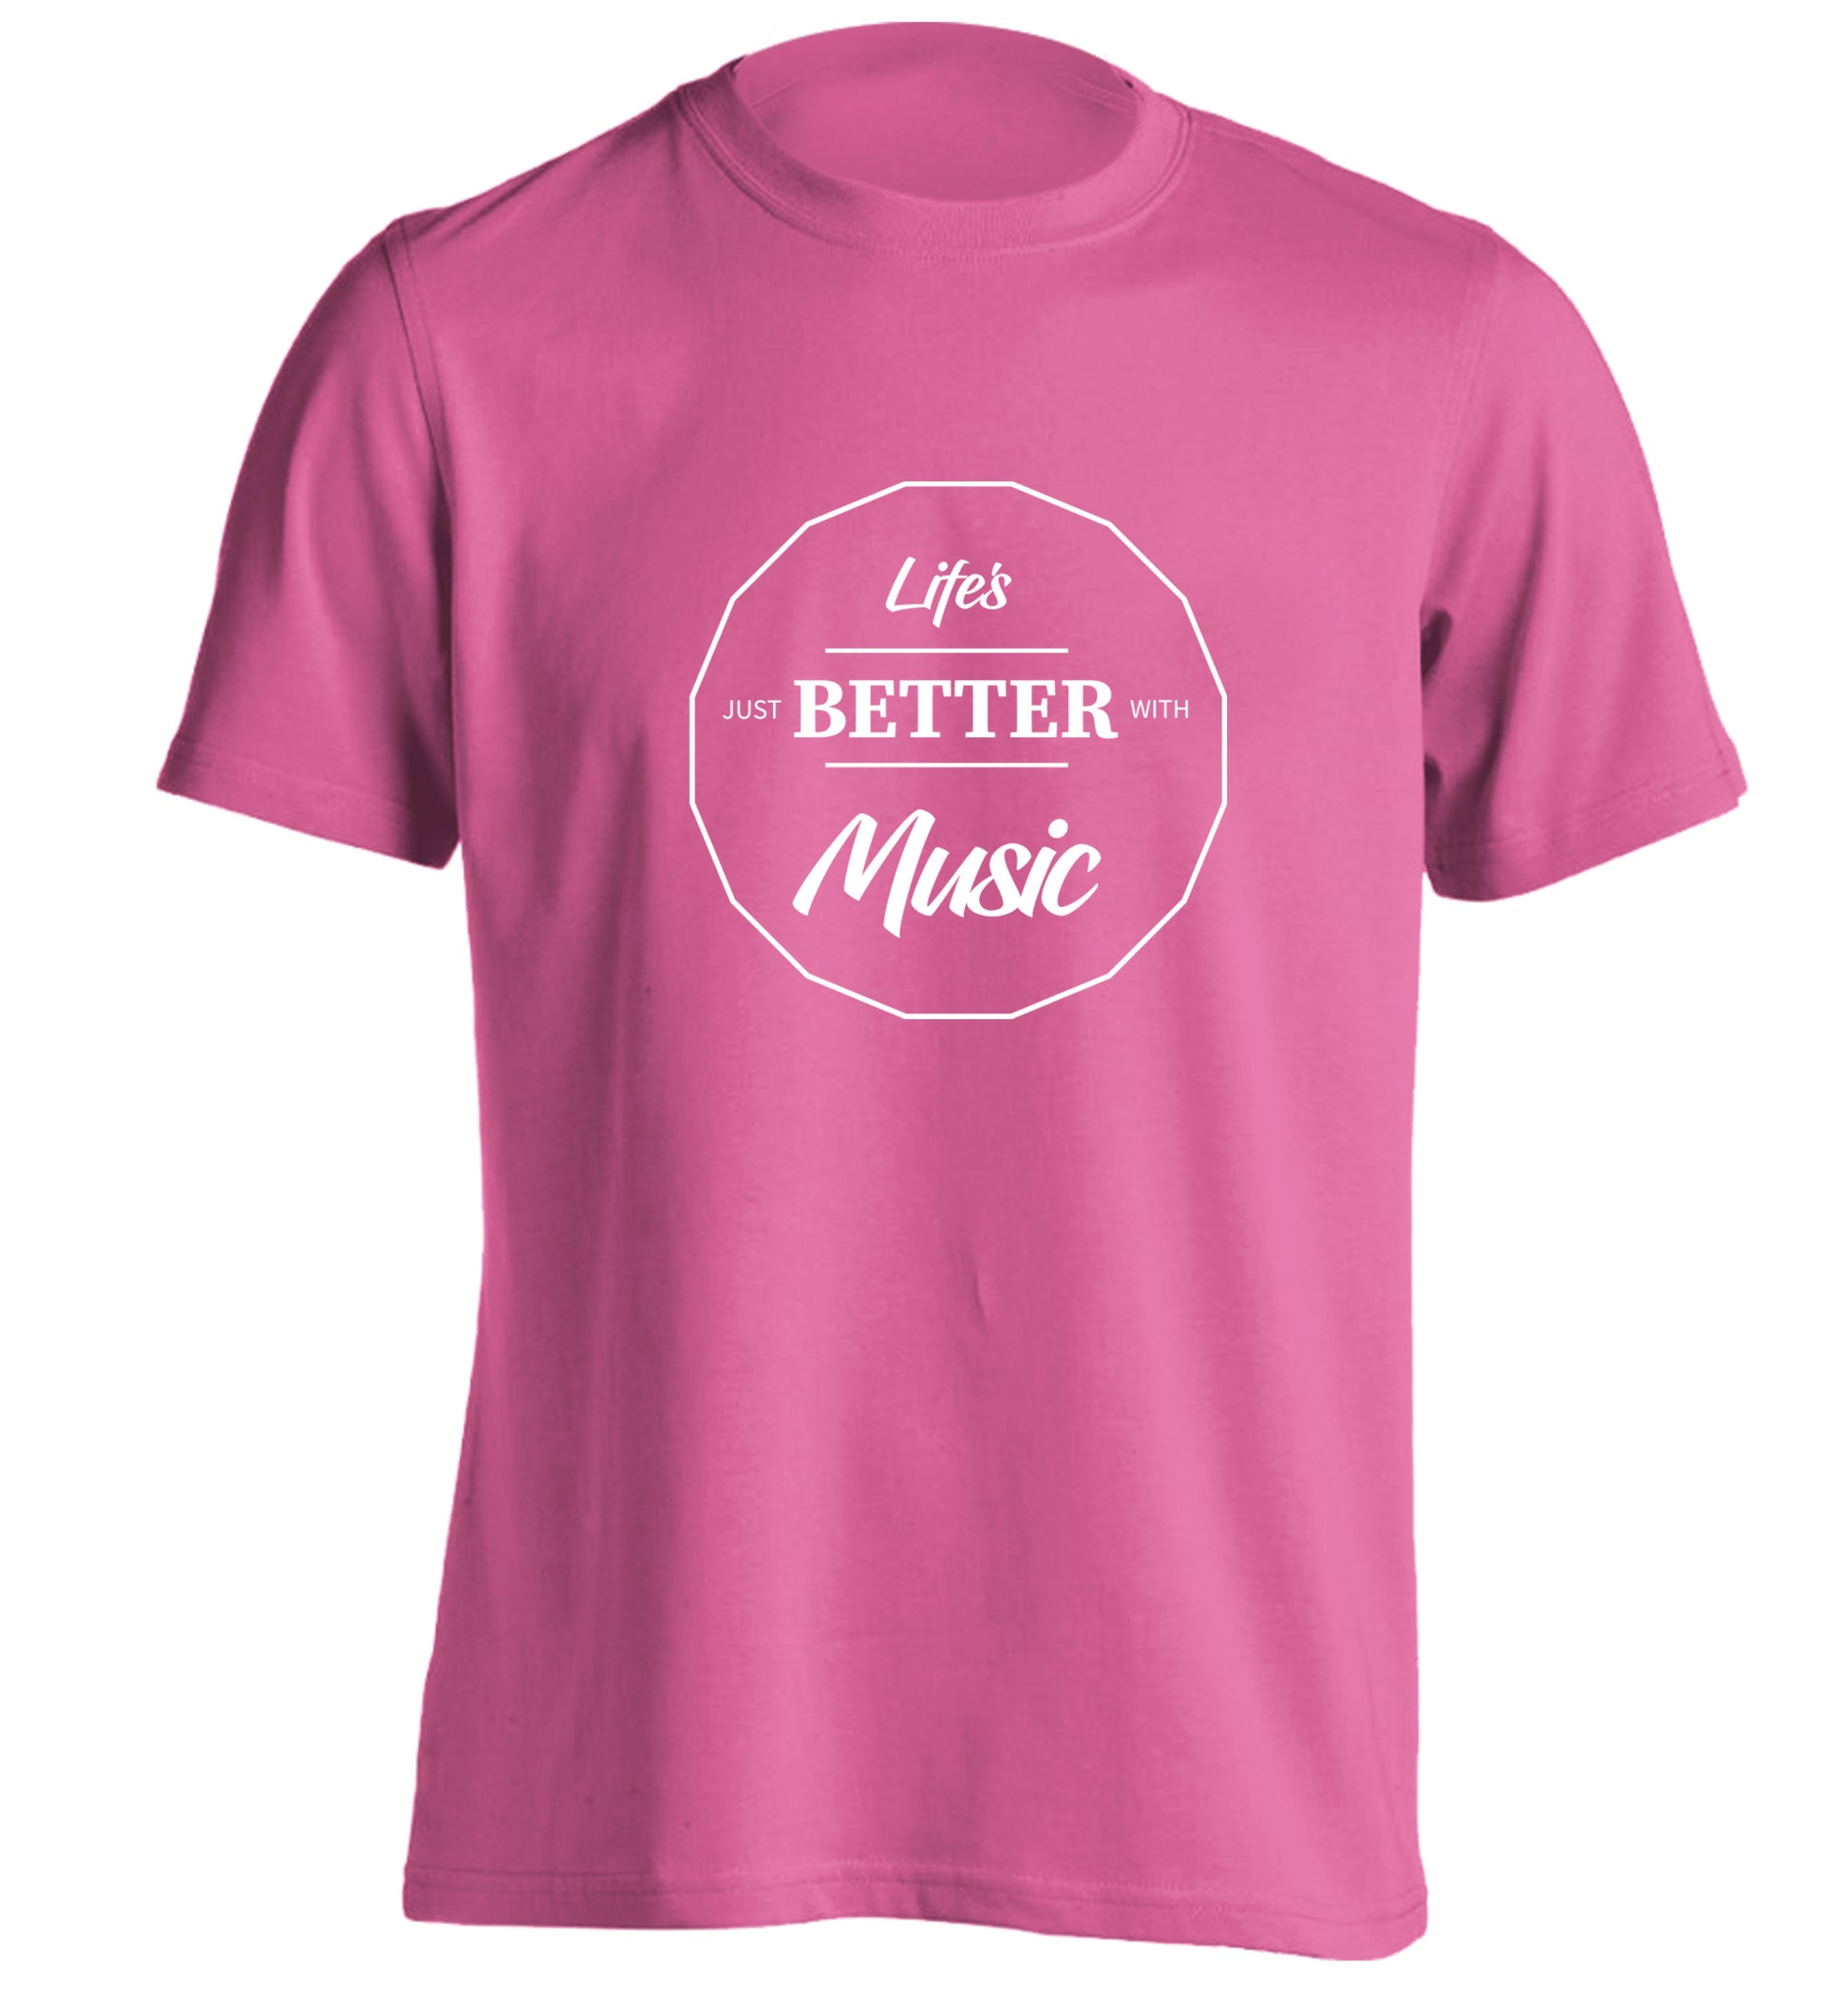 Life is Better With Music adults unisex pink Tshirt 2XL